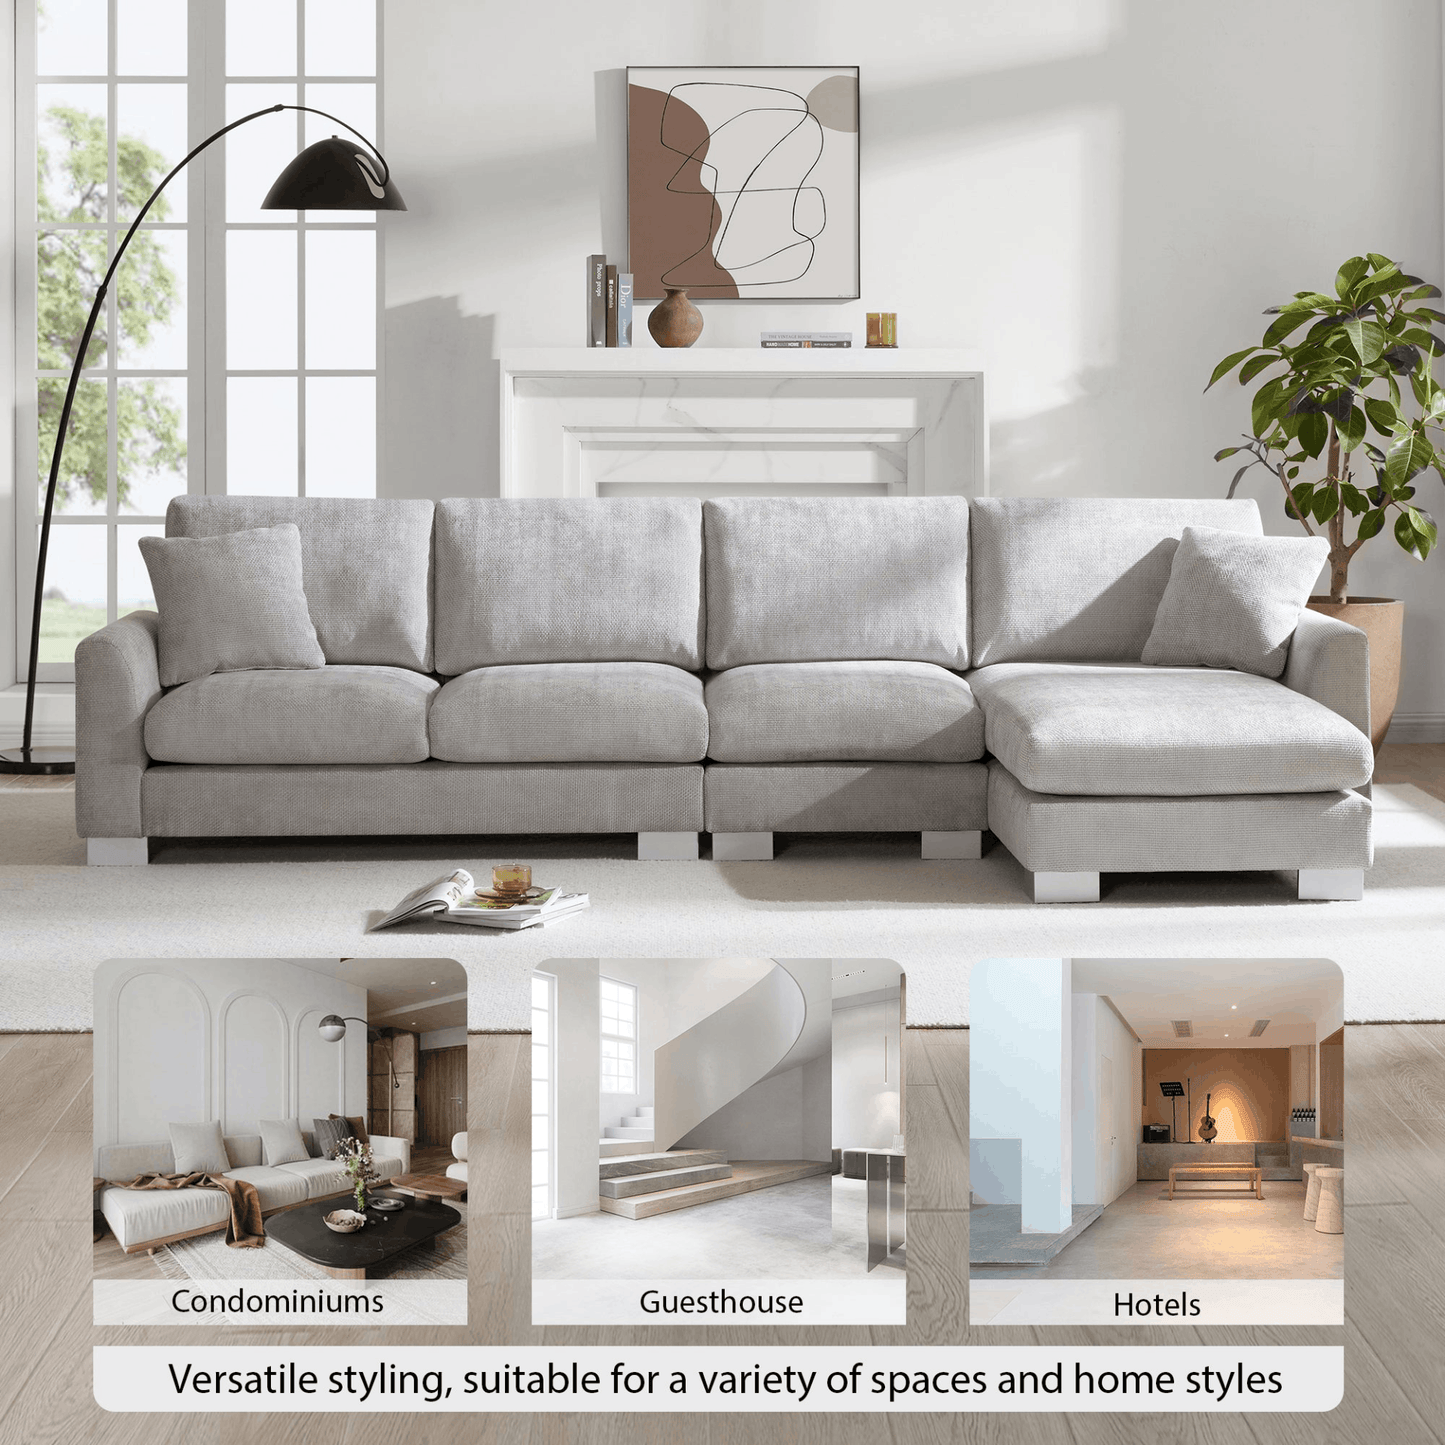 119*55" Modern Oversized Sectional Sofa,L-shaped Luxury Couch Set with 2 Free pillows,5-seat Chenille Indoor Furniture with Chaise for Living Room,Apartment,Office,2 Colors 